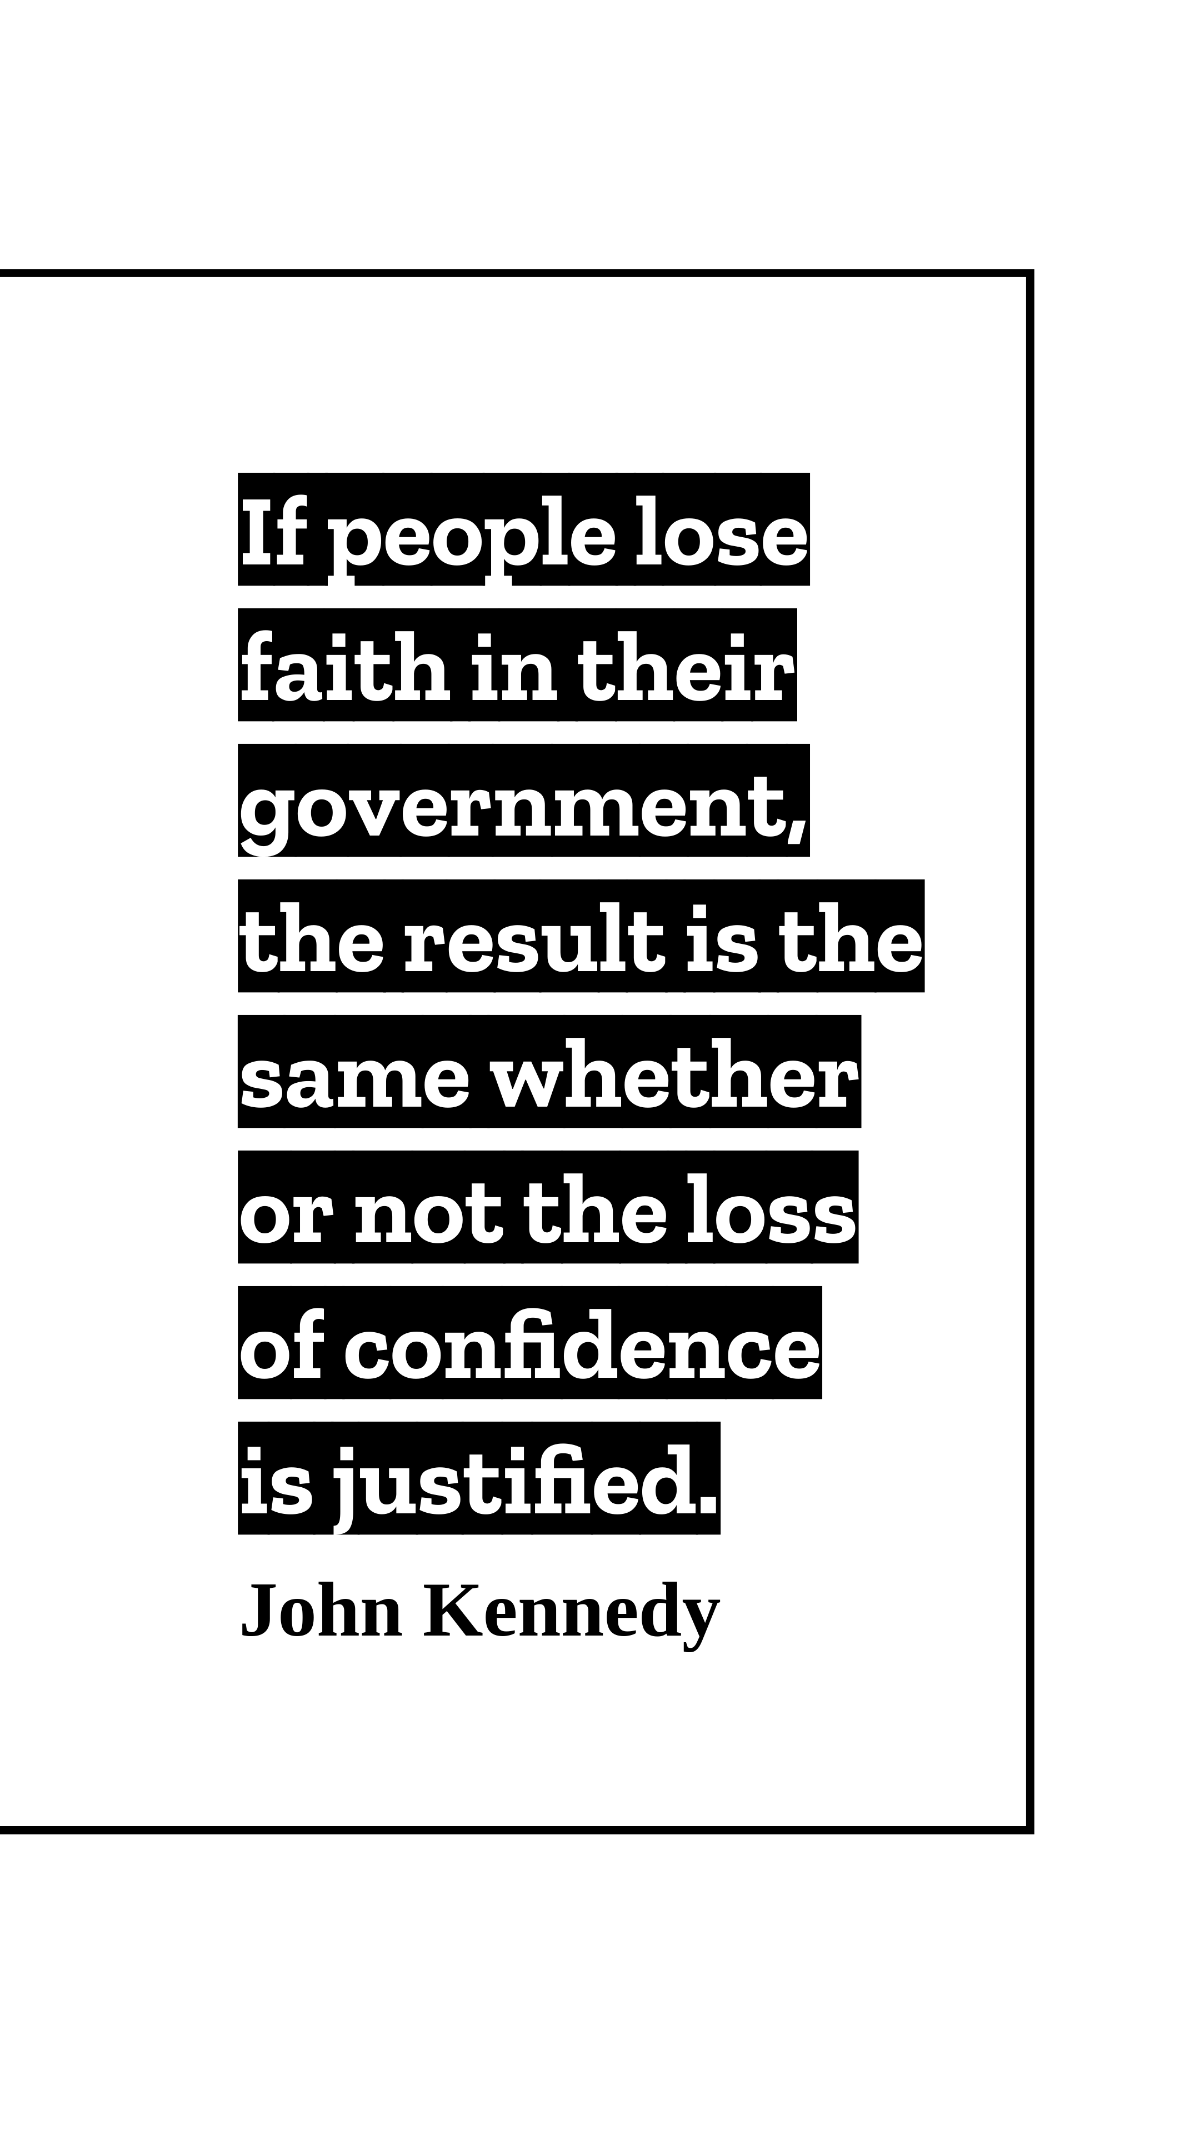 John Kennedy - If people lose faith in their government, the result is the same whether or not the loss of confidence is justified.